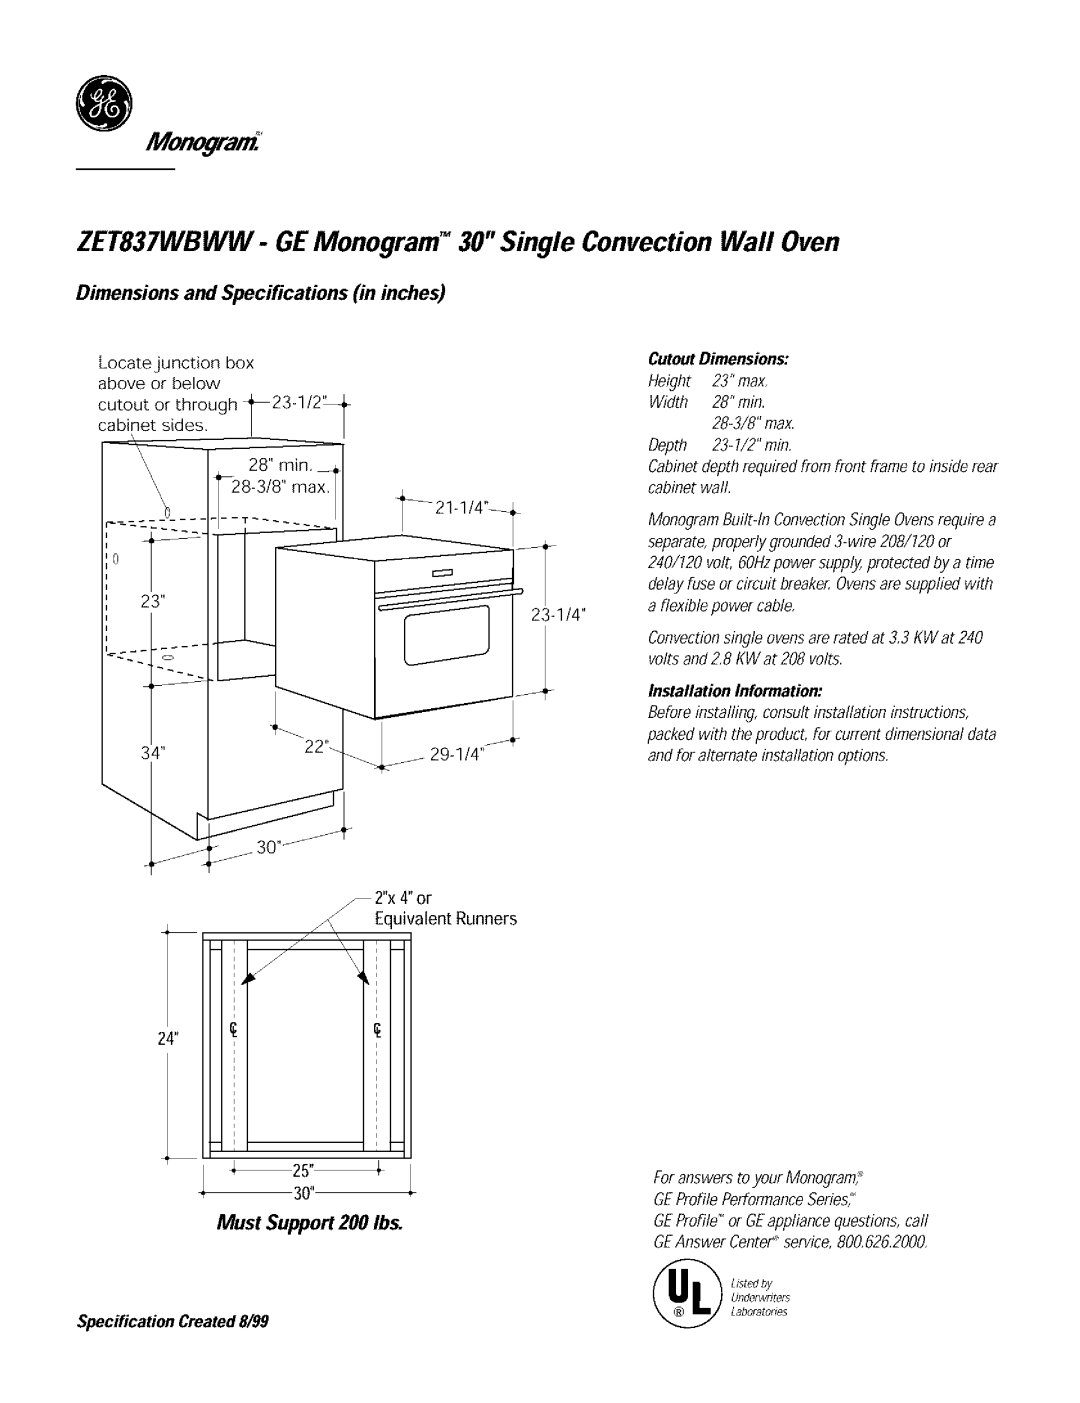 GE ZET837DBSB dimensions Monogram, Dimensions and Specifications in inches, InstallationInformation, Must Support 200 Ibs 